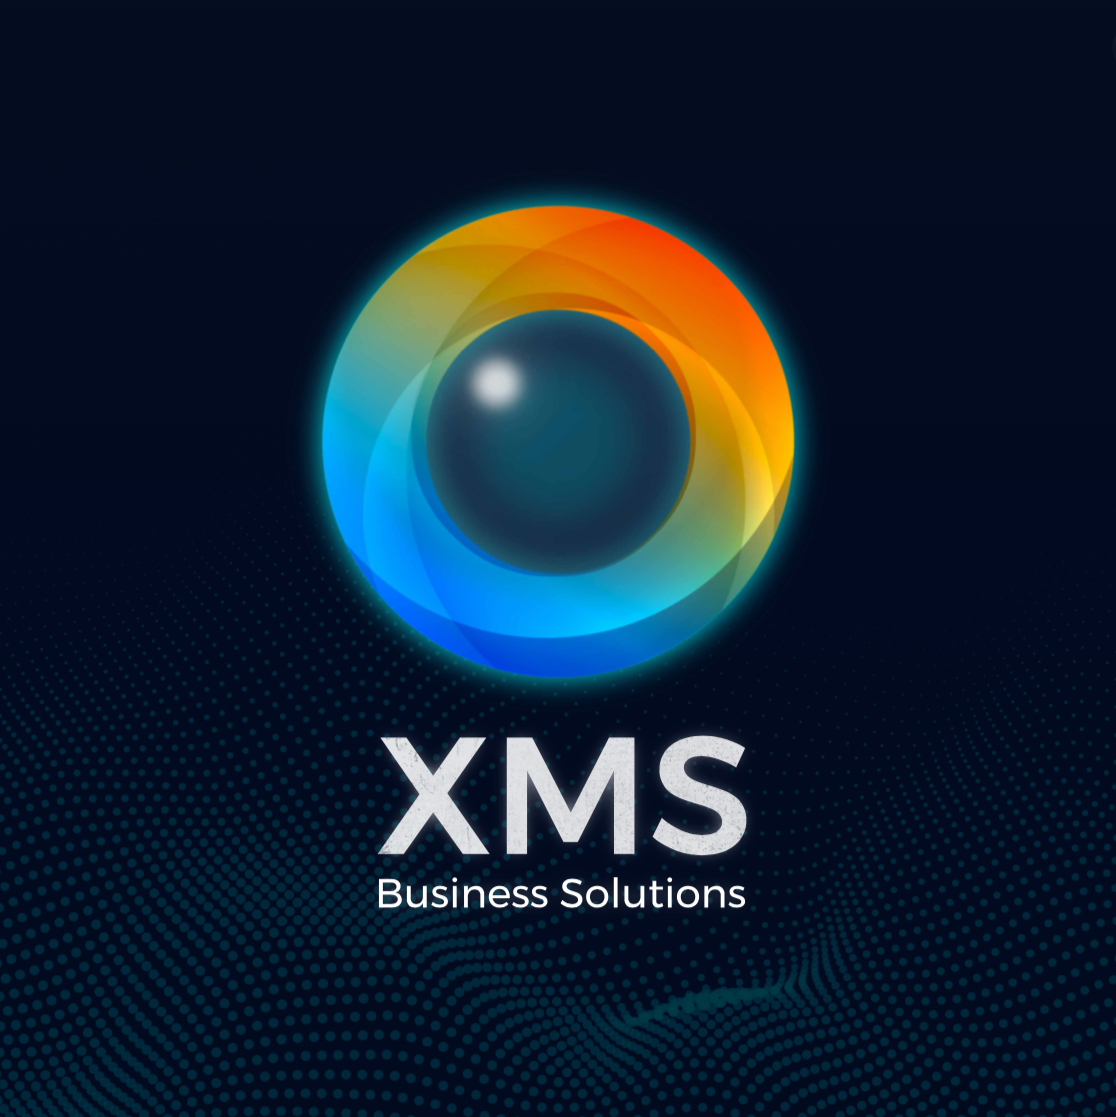 Project “XMS”